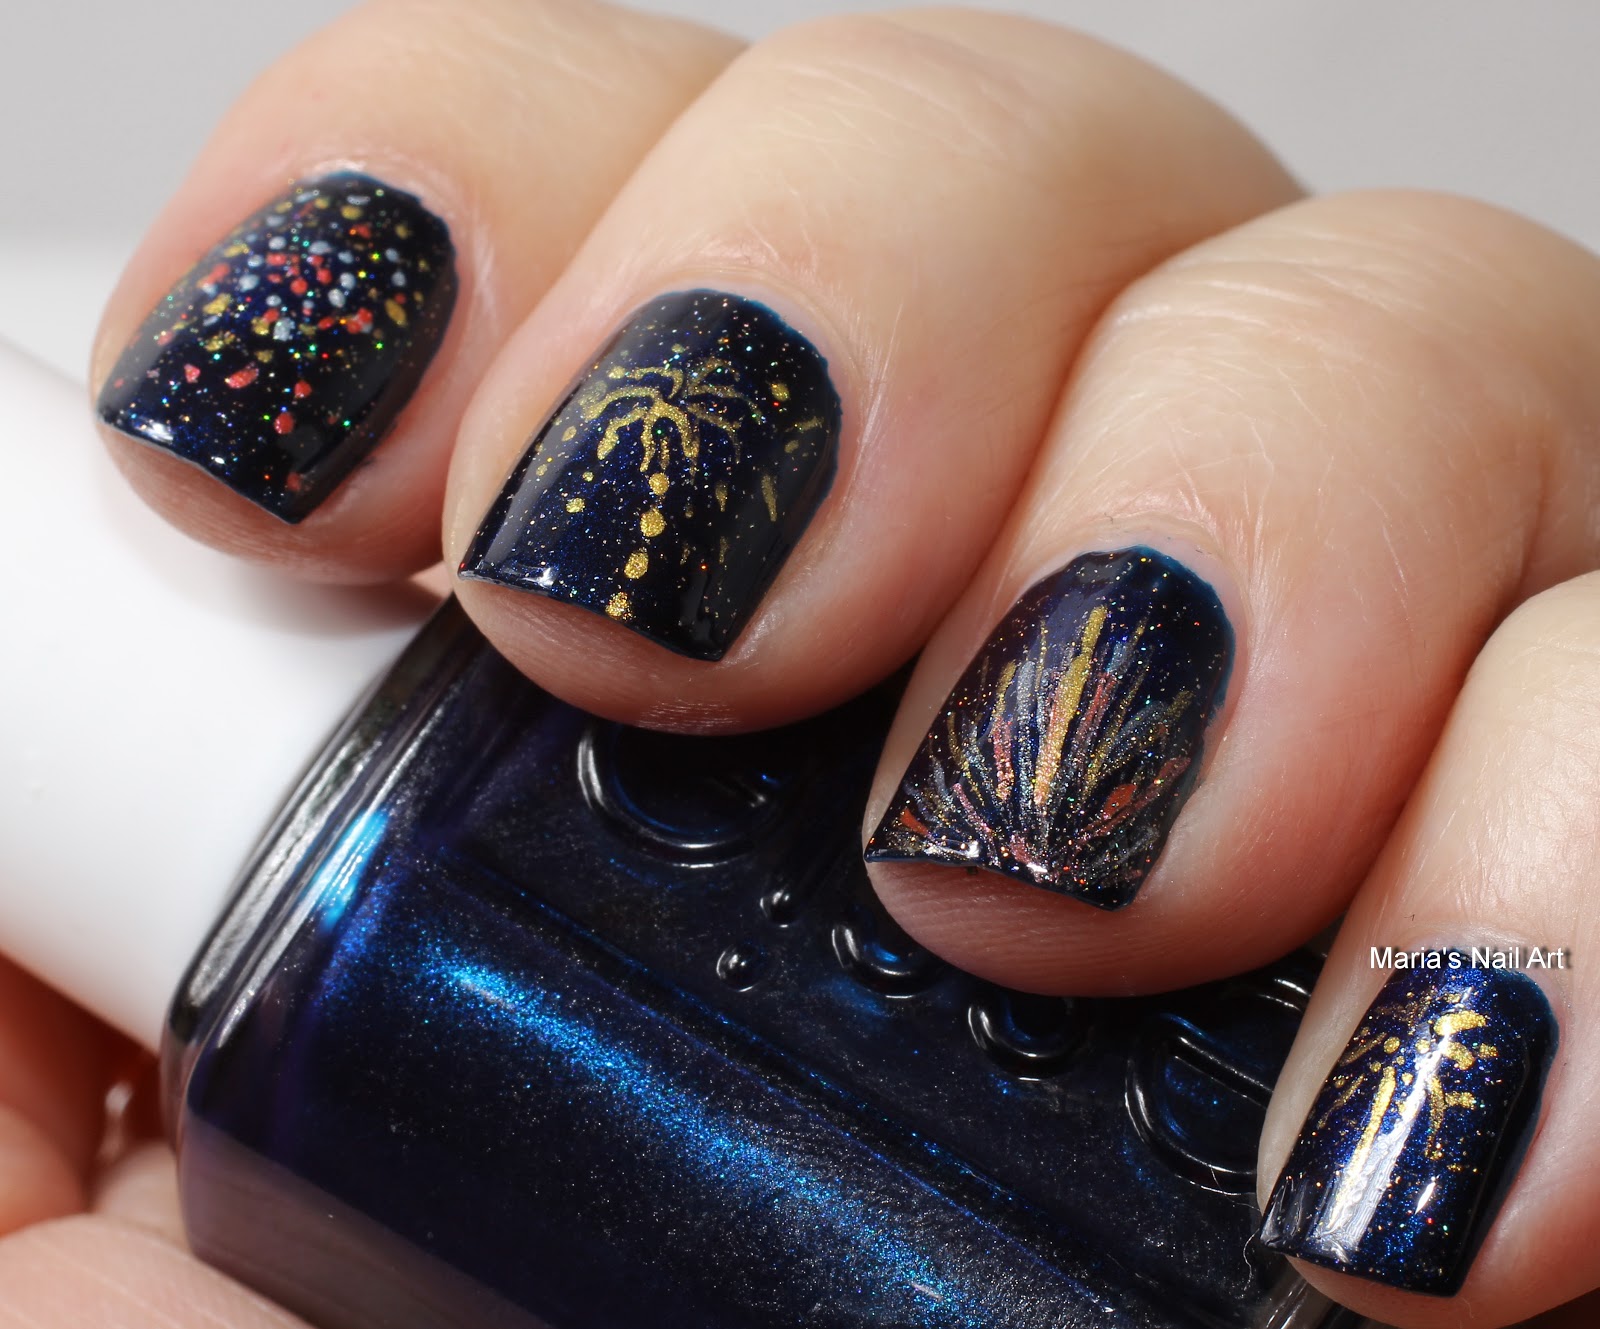 1. "New Year's Eve Nail Art Ideas on Tumblr" - wide 2